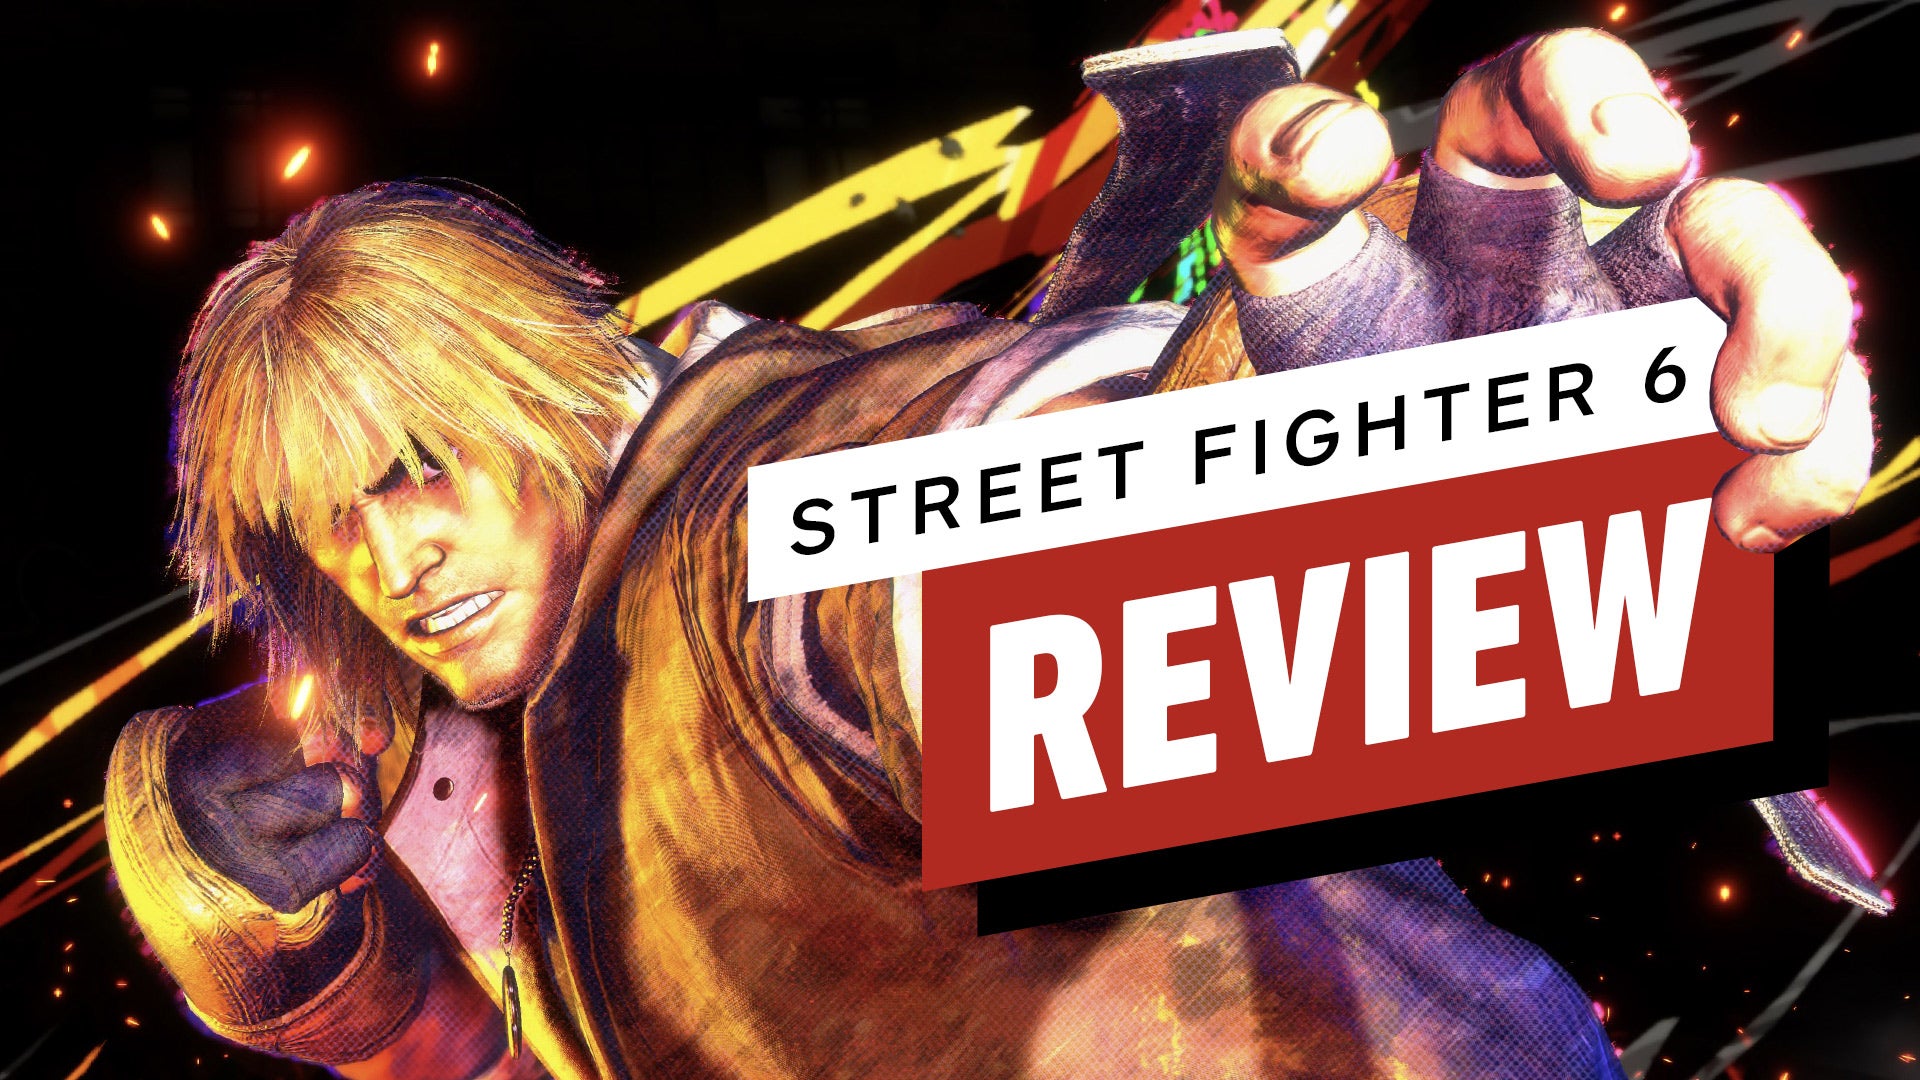 metacritic on X: Street Fighter 6 (Metascore Updates) [PS5 - 92] (60 revs)   [PC - 93] (19 revs)  [XSX -  89] (12 revs)  Arguably the best overall fighting  game